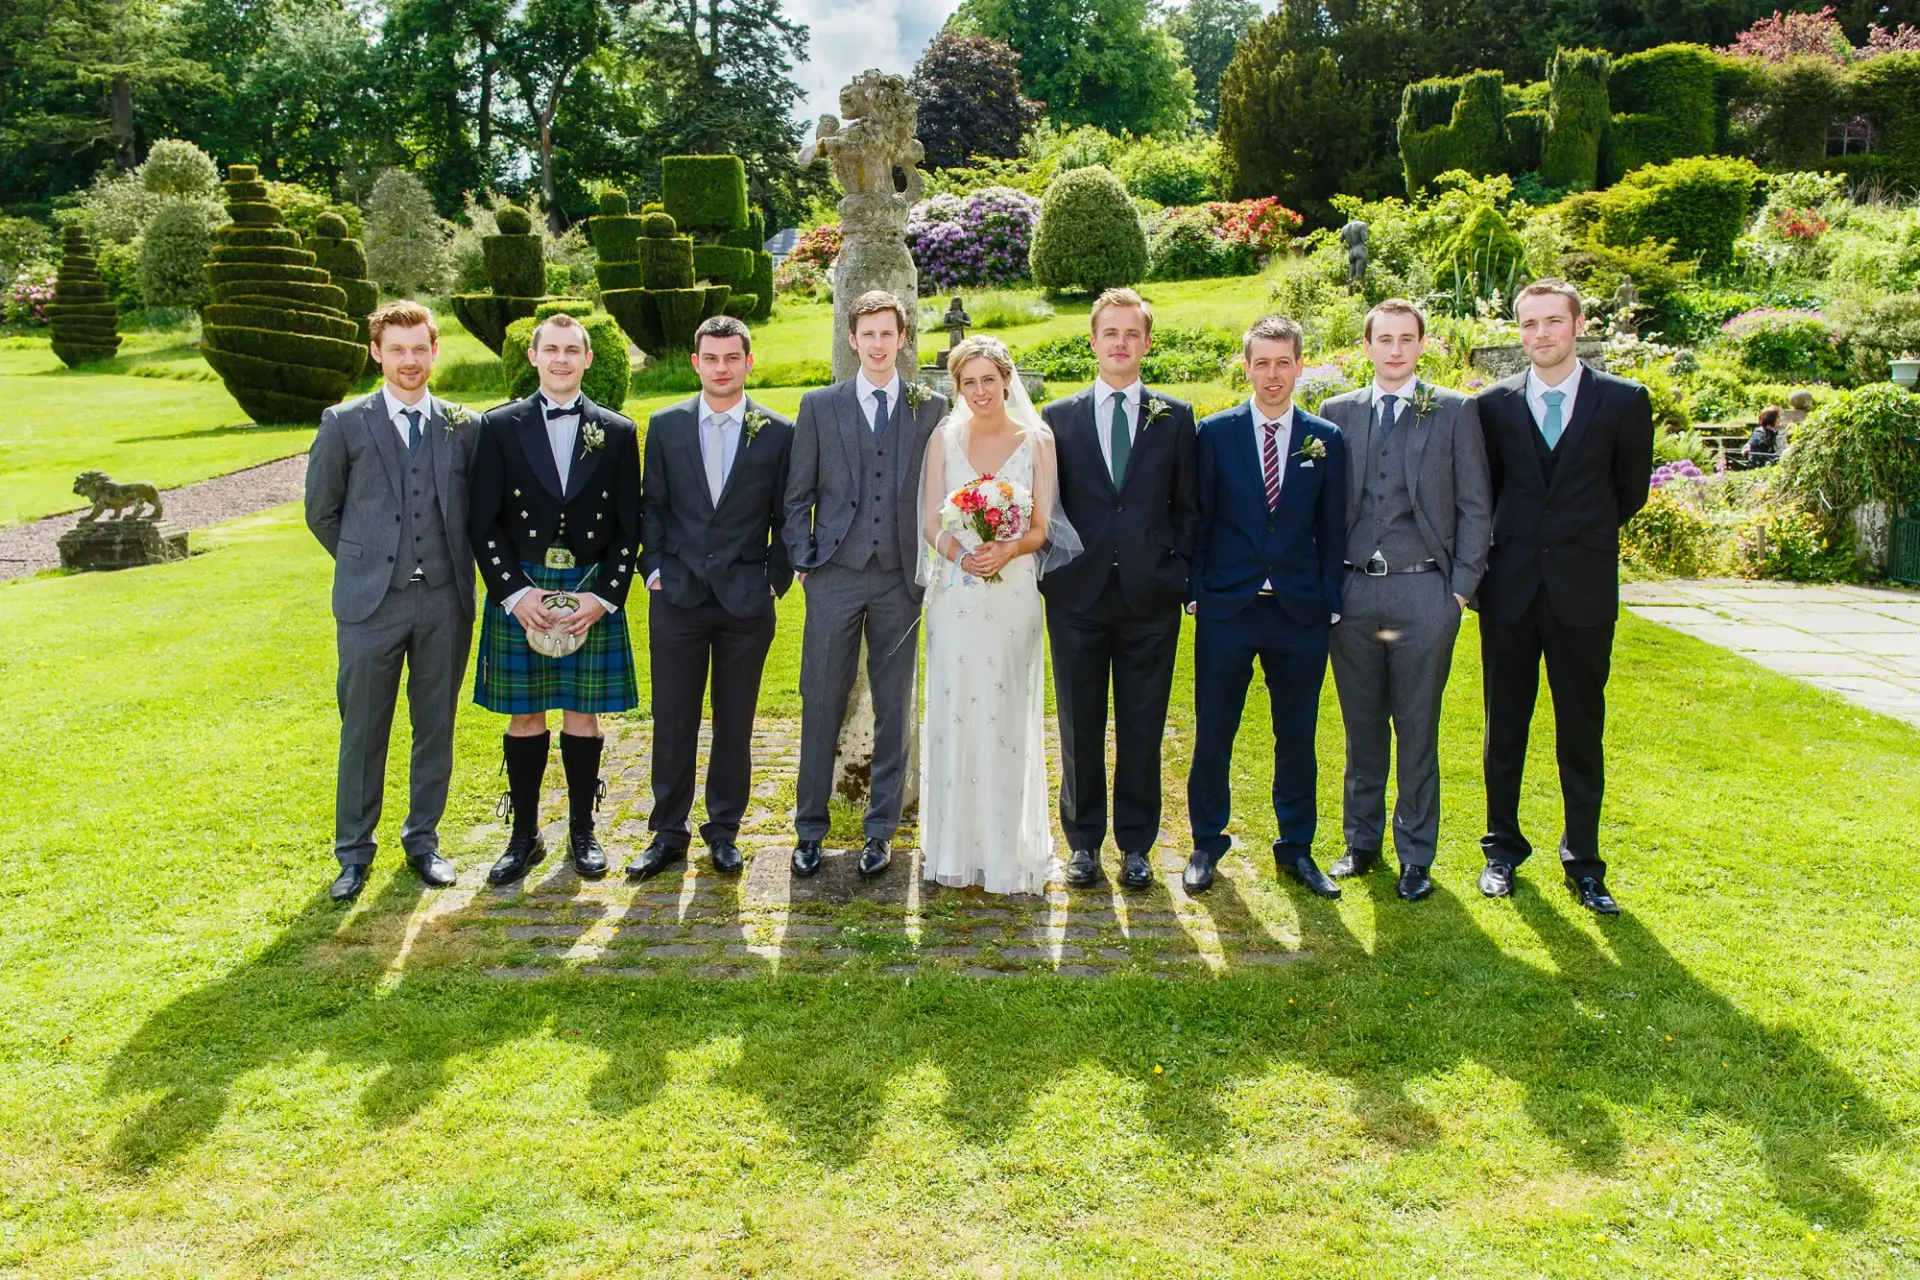 A bride and groom with six groomsmen posing in a formal garden; one groomsman wearing traditional scottish attire.